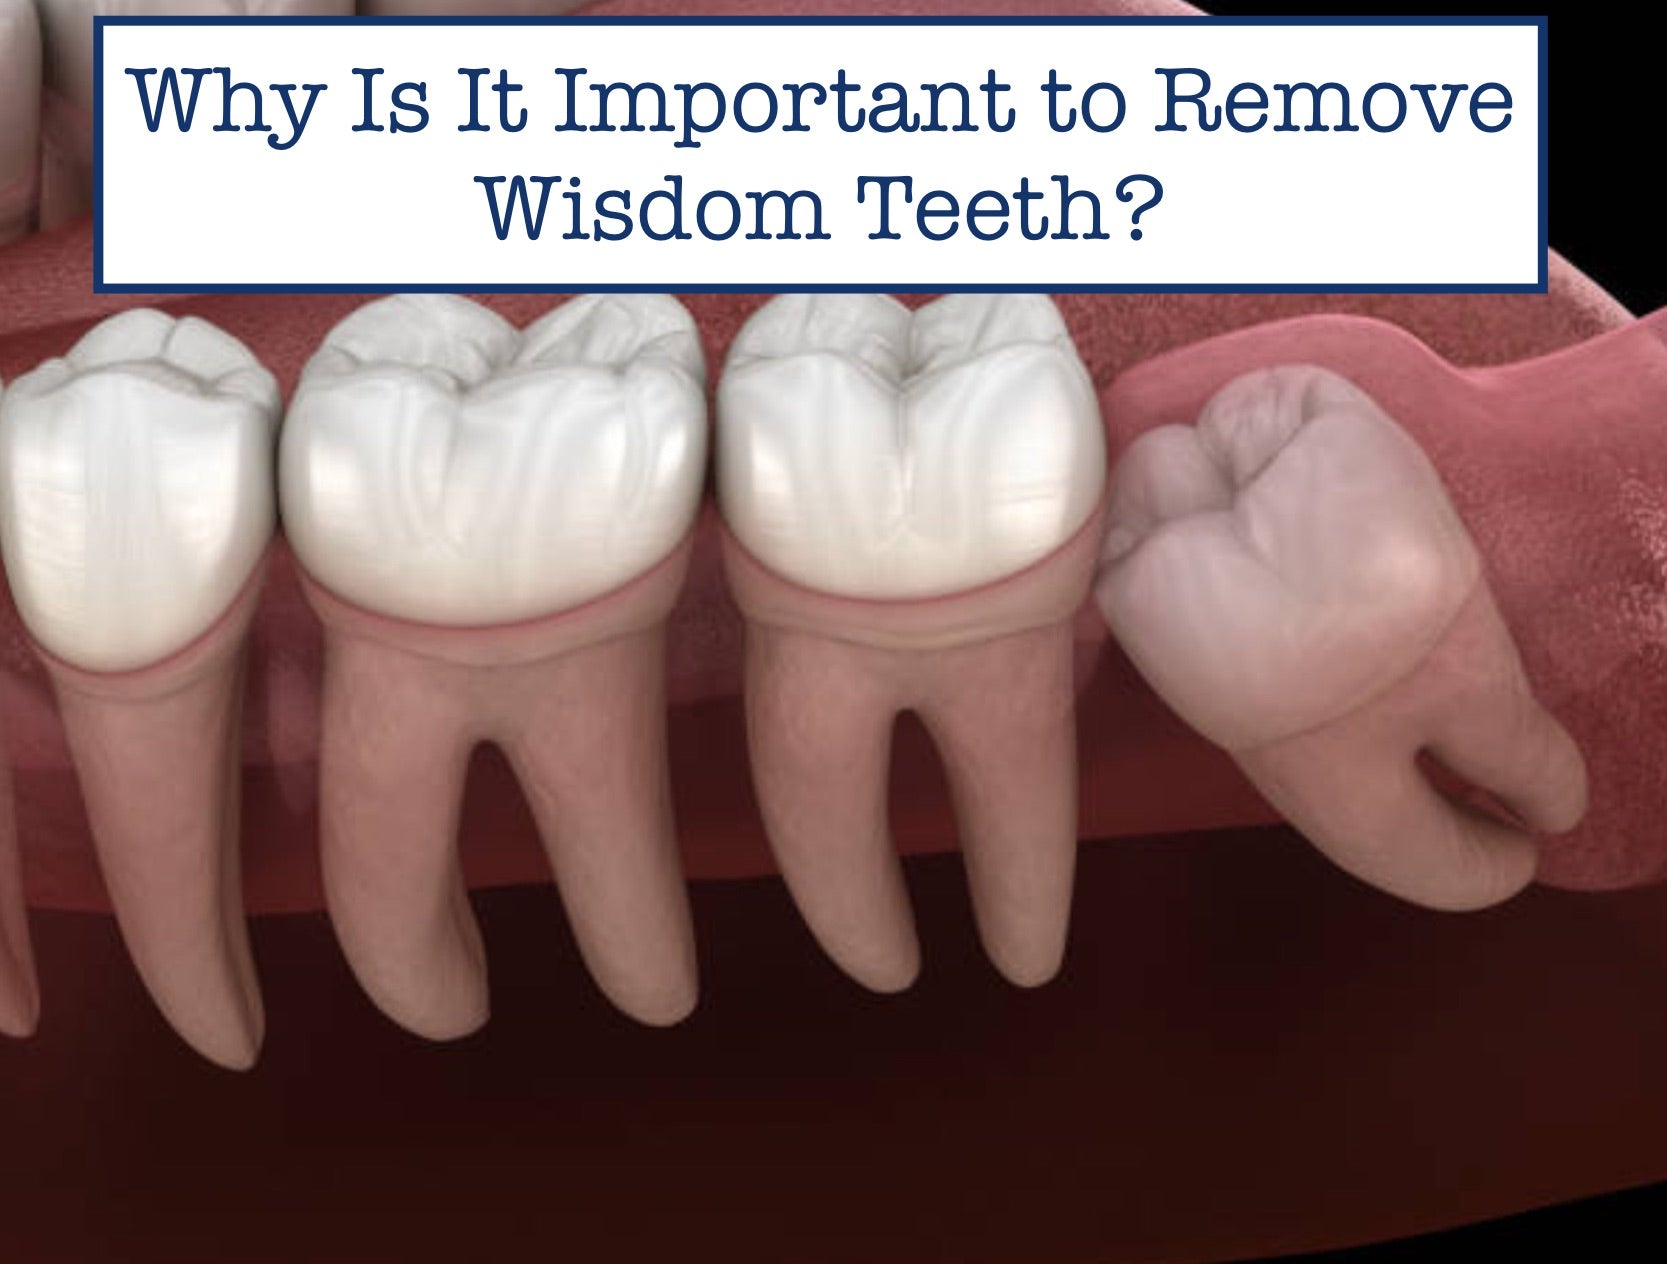 Why Is It Important to Remove Wisdom Teeth?